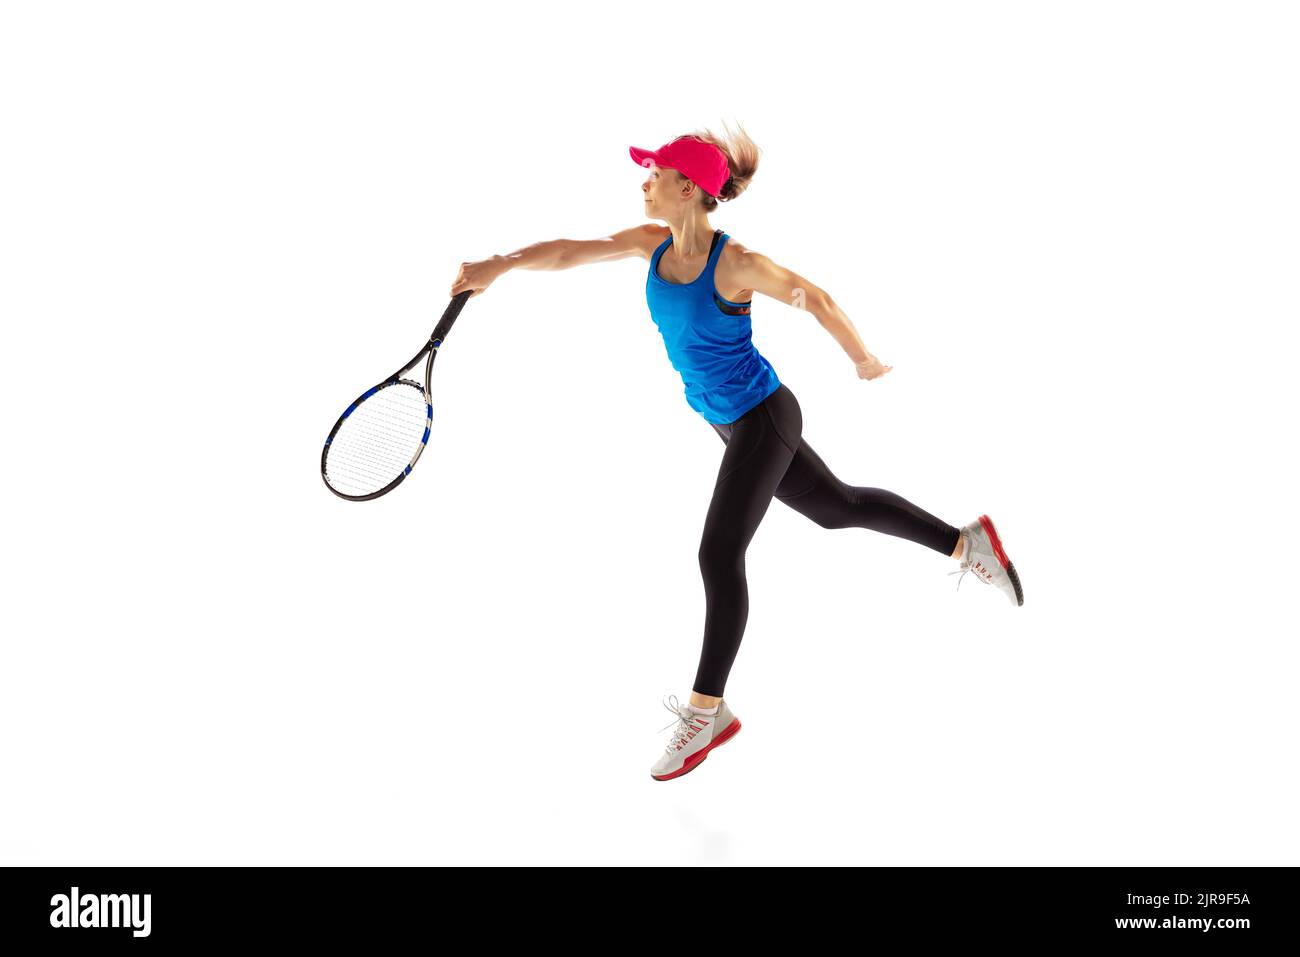 Young sportive woman, tennis player playing tennis isolated on white background. Healthy lifestyle, fitness, sport, exercise concept. Stock Photo